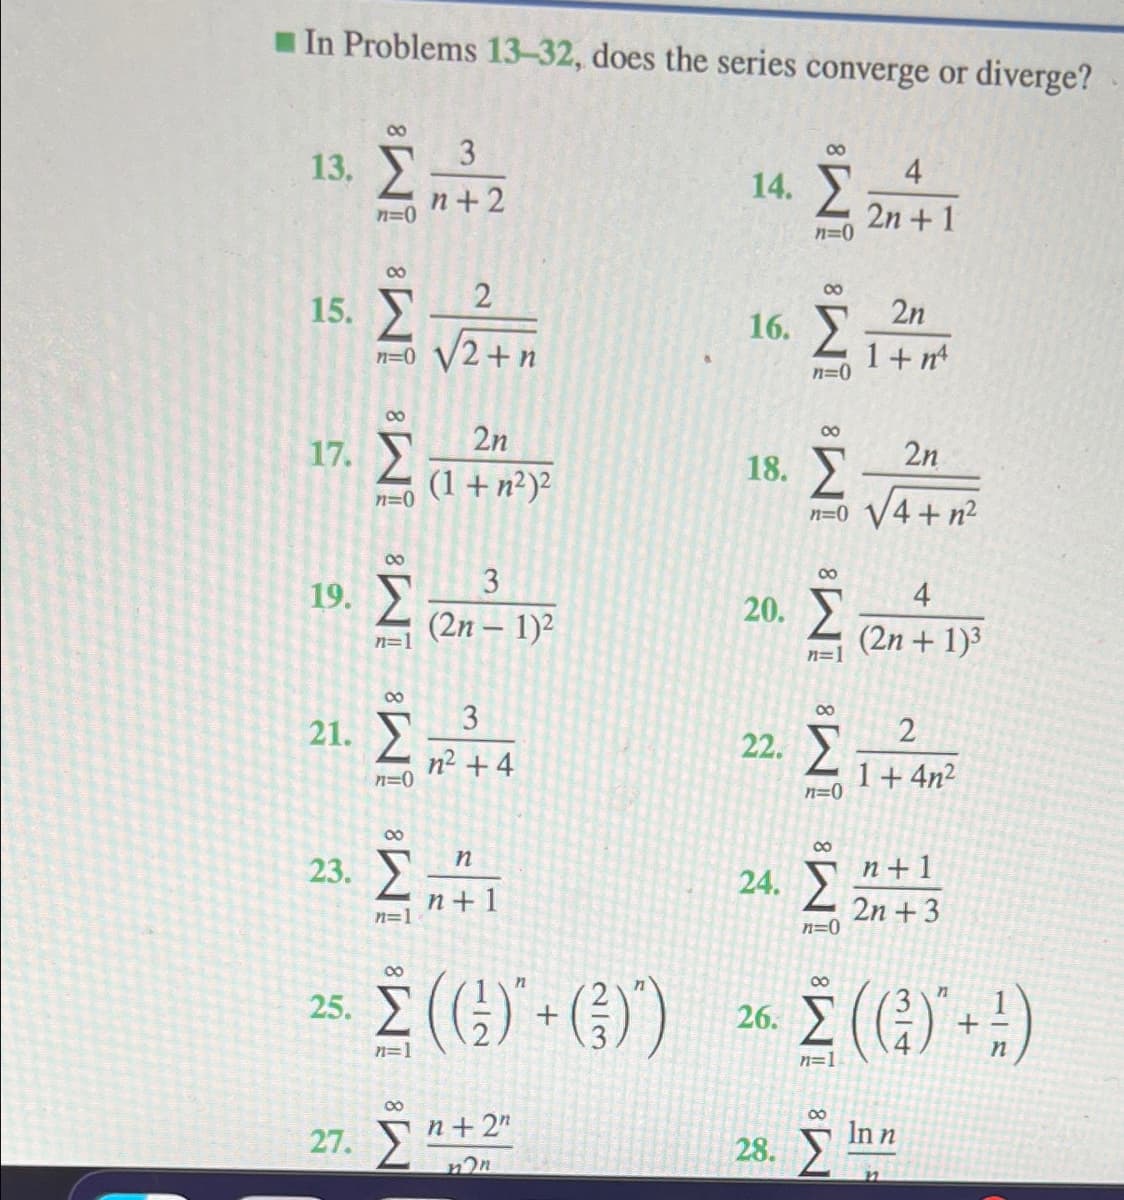 I In Problems 13-32, does the series converge or diverge?
00
3
13. 2
n+2
00
4
14. Y
2n + 1
00
00
15.
2n
16. 2
n=0 V2+n
1+ nt
n=0
2n
17. 2
00
2n
18. У
(1+n²)2
n=0
4+ n²
n=0
00
00
3
19.
20.
4
(2n – 1)²
(2n + 1)3
n=1
n=1
3
00
21.
22.
n2 + 4
1+ 4n²
n=0
00
23. Ž".
n+1
24. 2
n + 1
2n + 3
n=0
n=1
25. (G) + (}))
00
E () -:)
00
26.
n=1
n=1
27. 5*
00
00
n+ 2"
In n
28.
